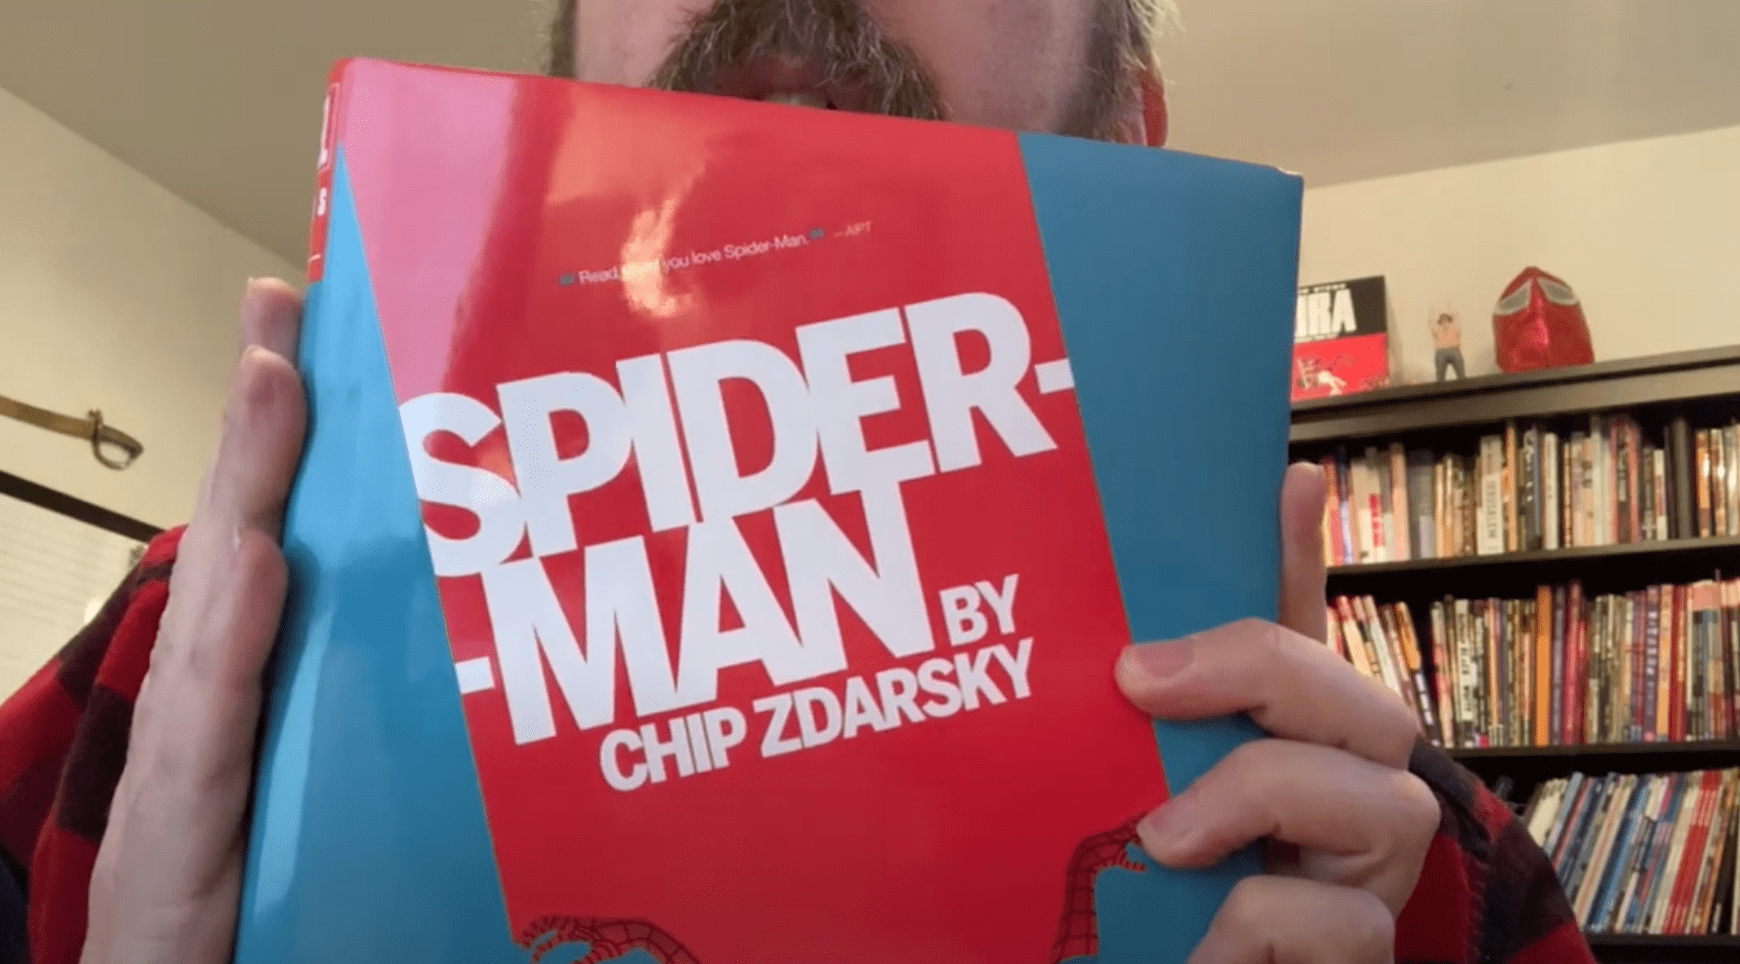 Chip Zdarsky recommends throwing away old Spider-Man trades